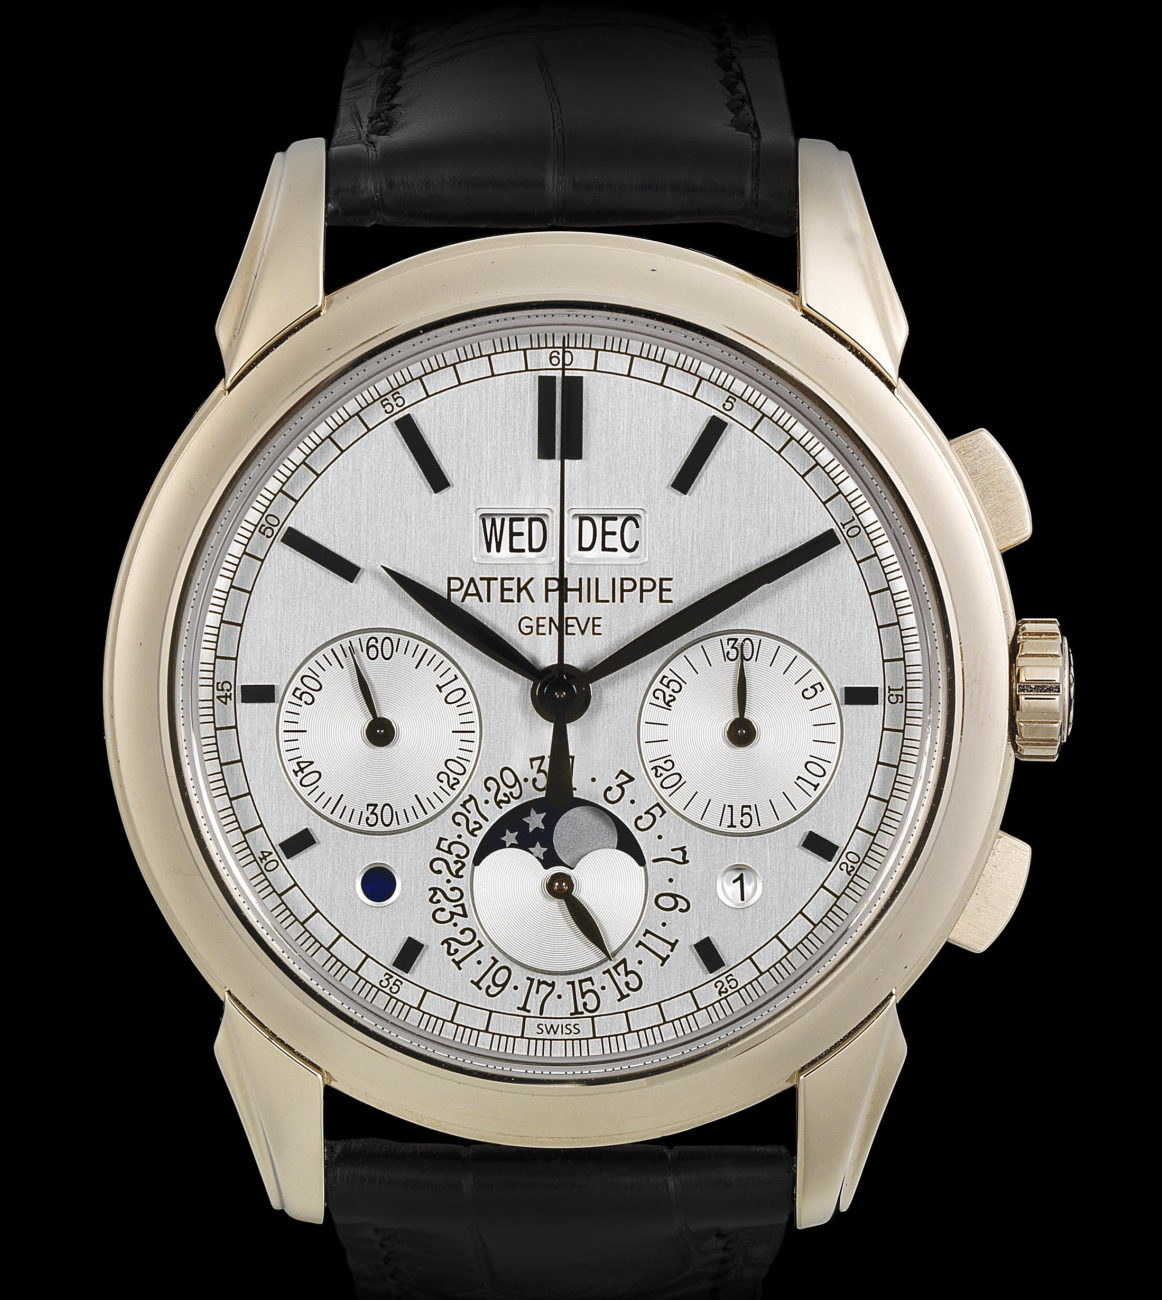 Patek philippe. A fine 18k white gold manual wind perpetual calendar chronograph wristwatch with moon phase